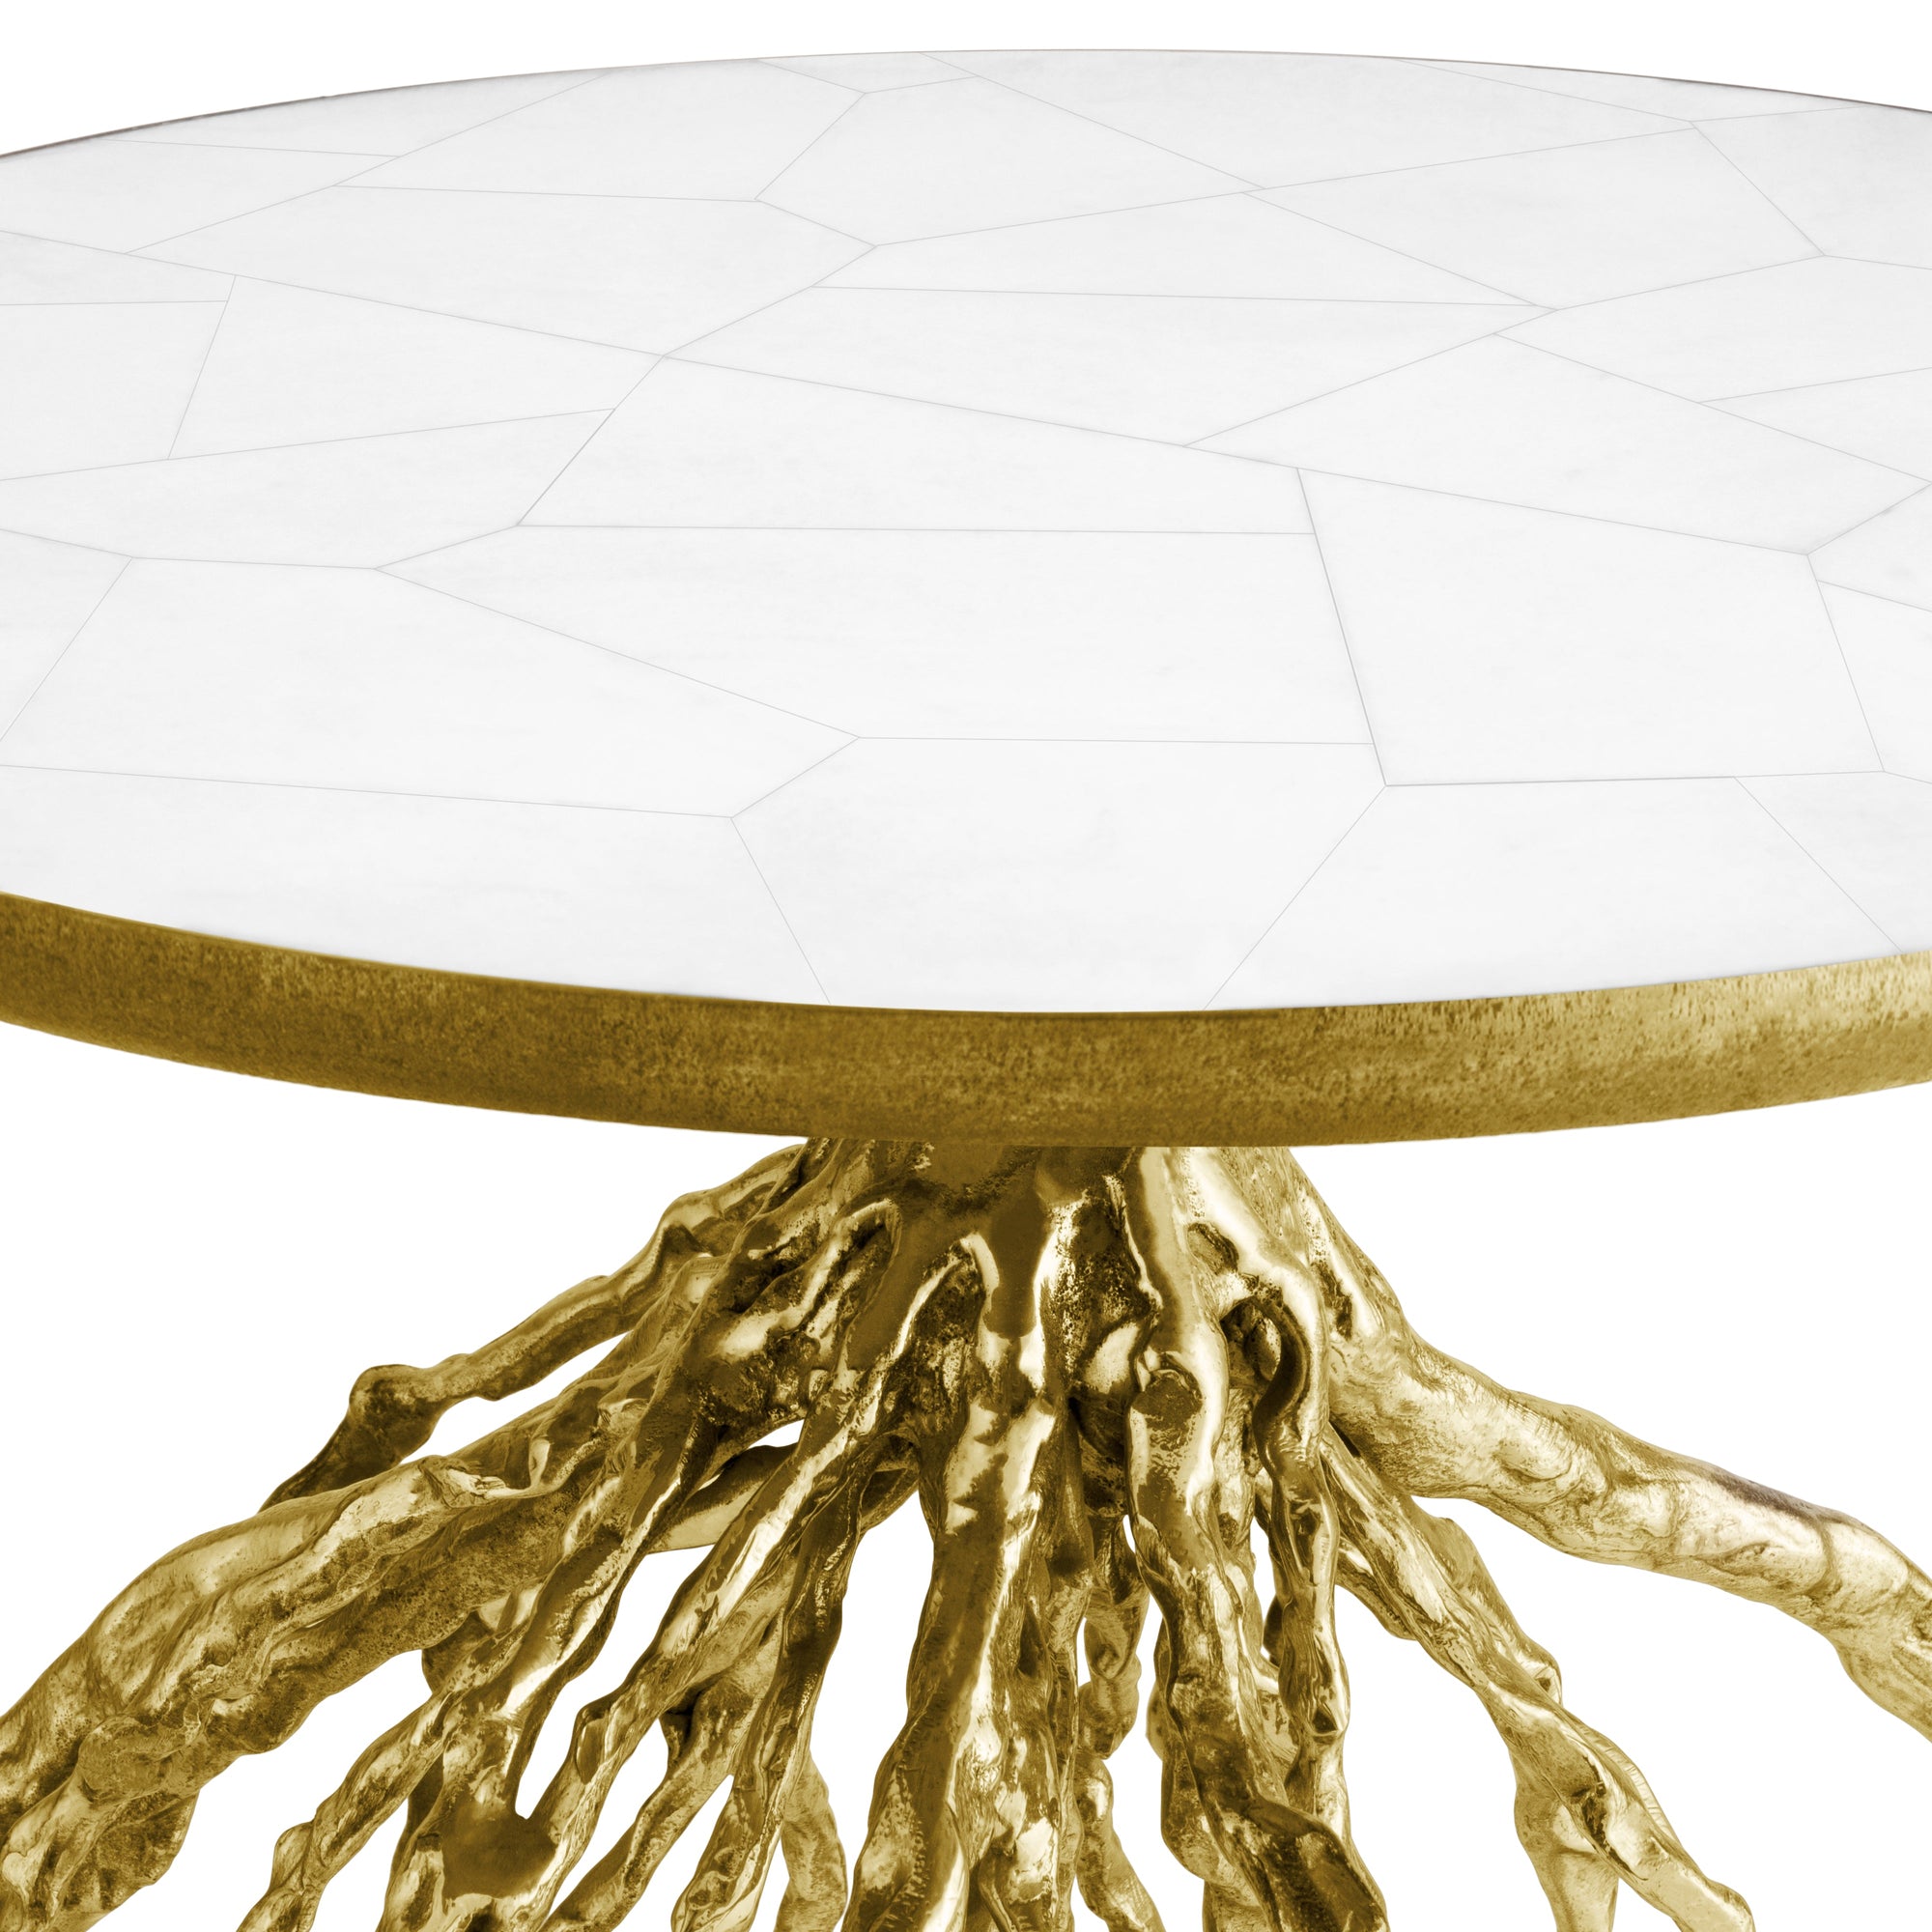 Michael Aram Water Hyacinth Accent Table